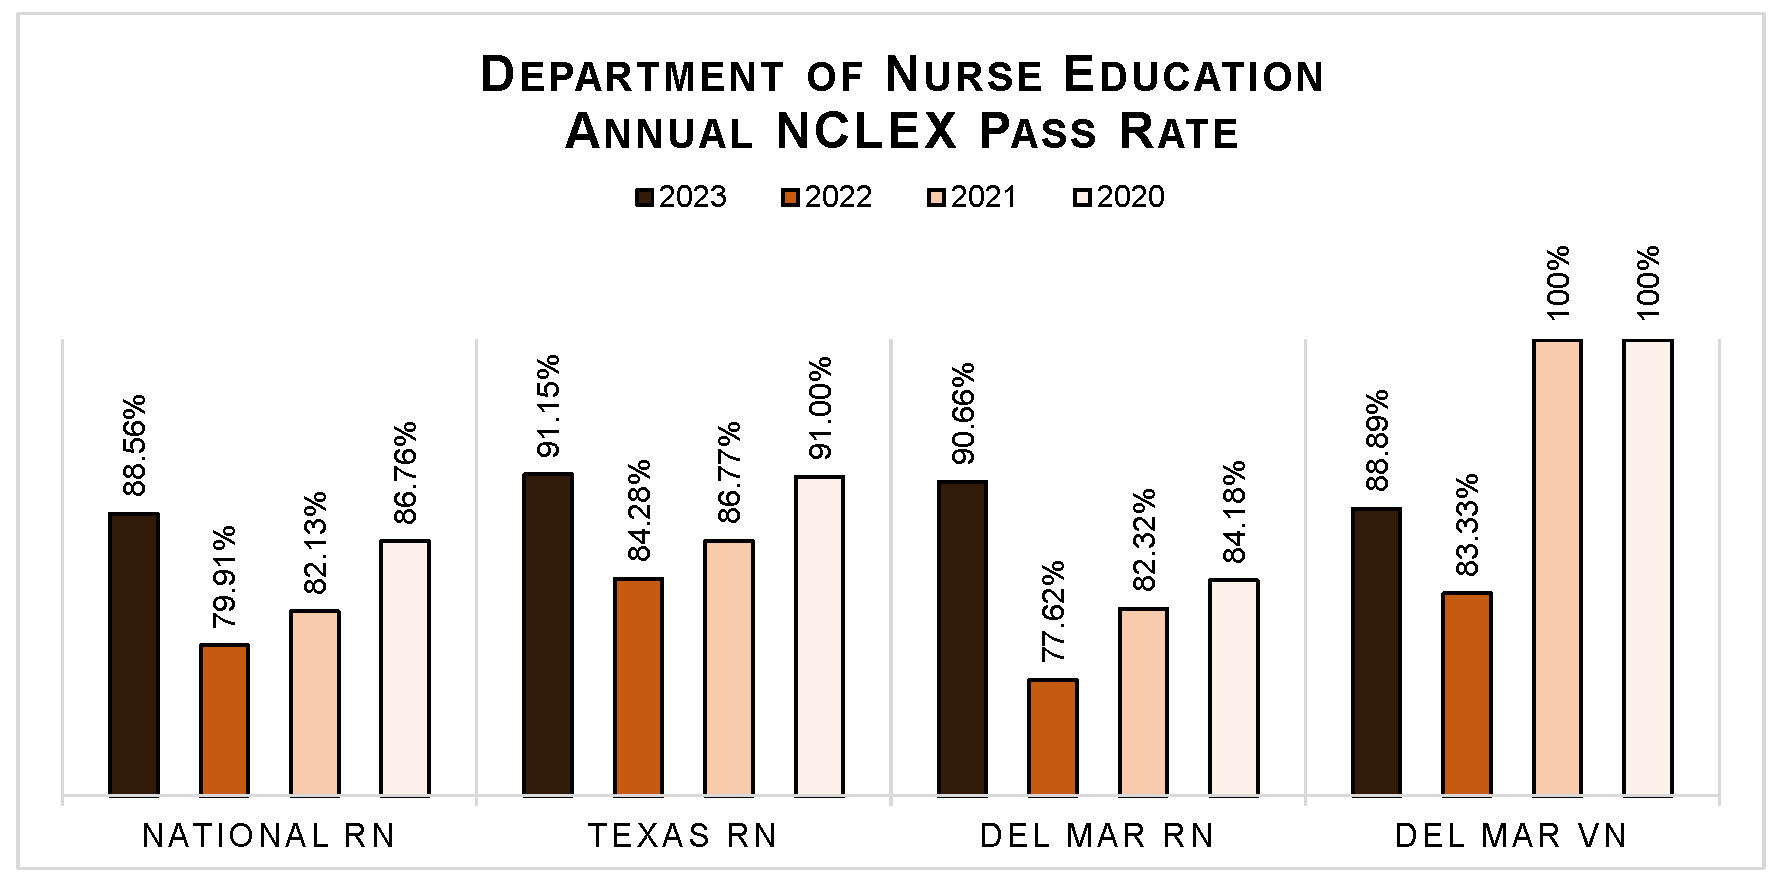 Annual NCLEX pass rates 2020-2023 for national, state, and DMC RN, and DMC VN